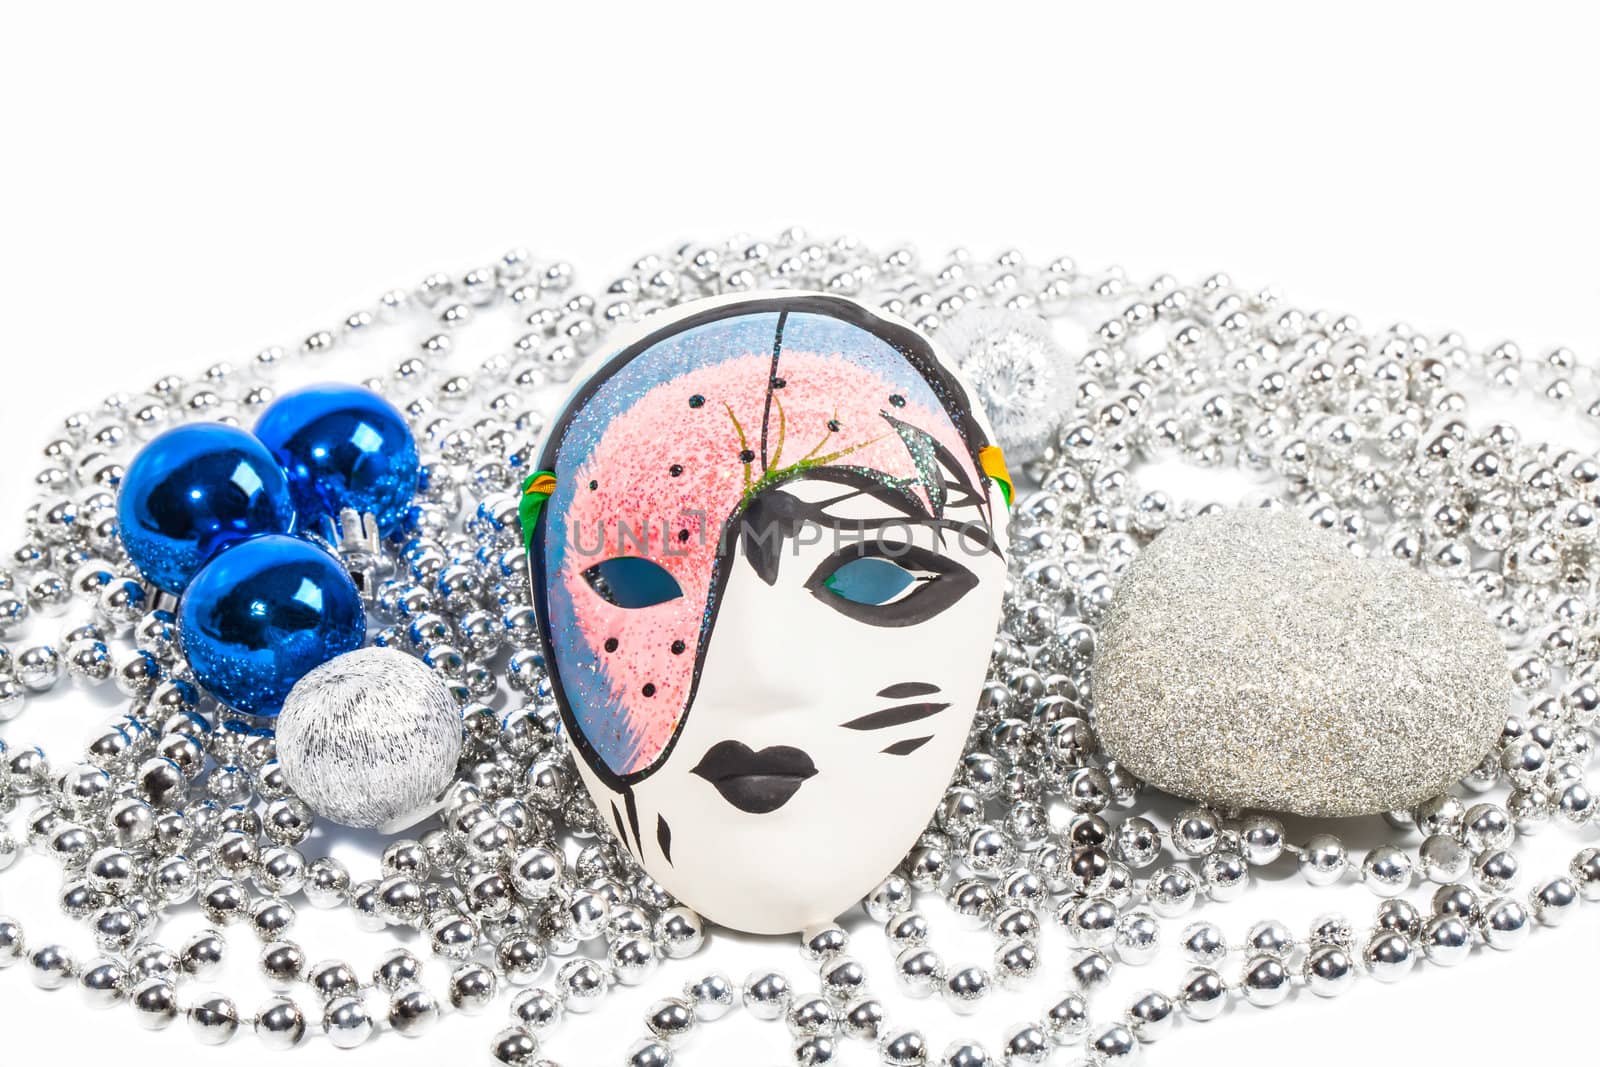 Mask with silver beads and blue balls by RawGroup